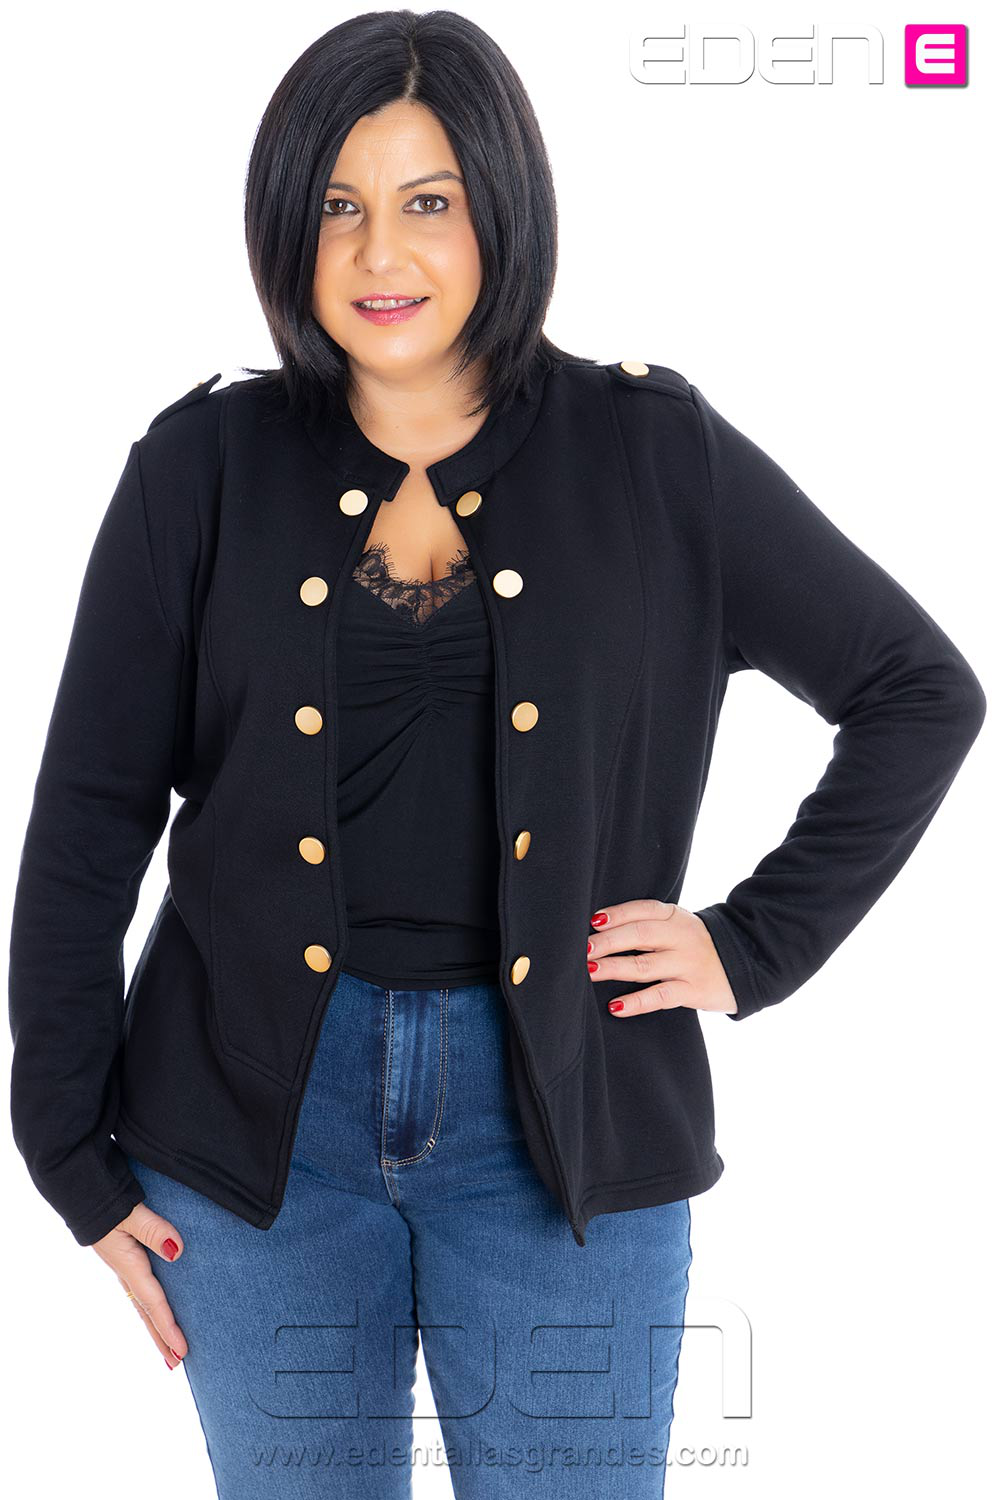 chaqueta-carnette-negro-only